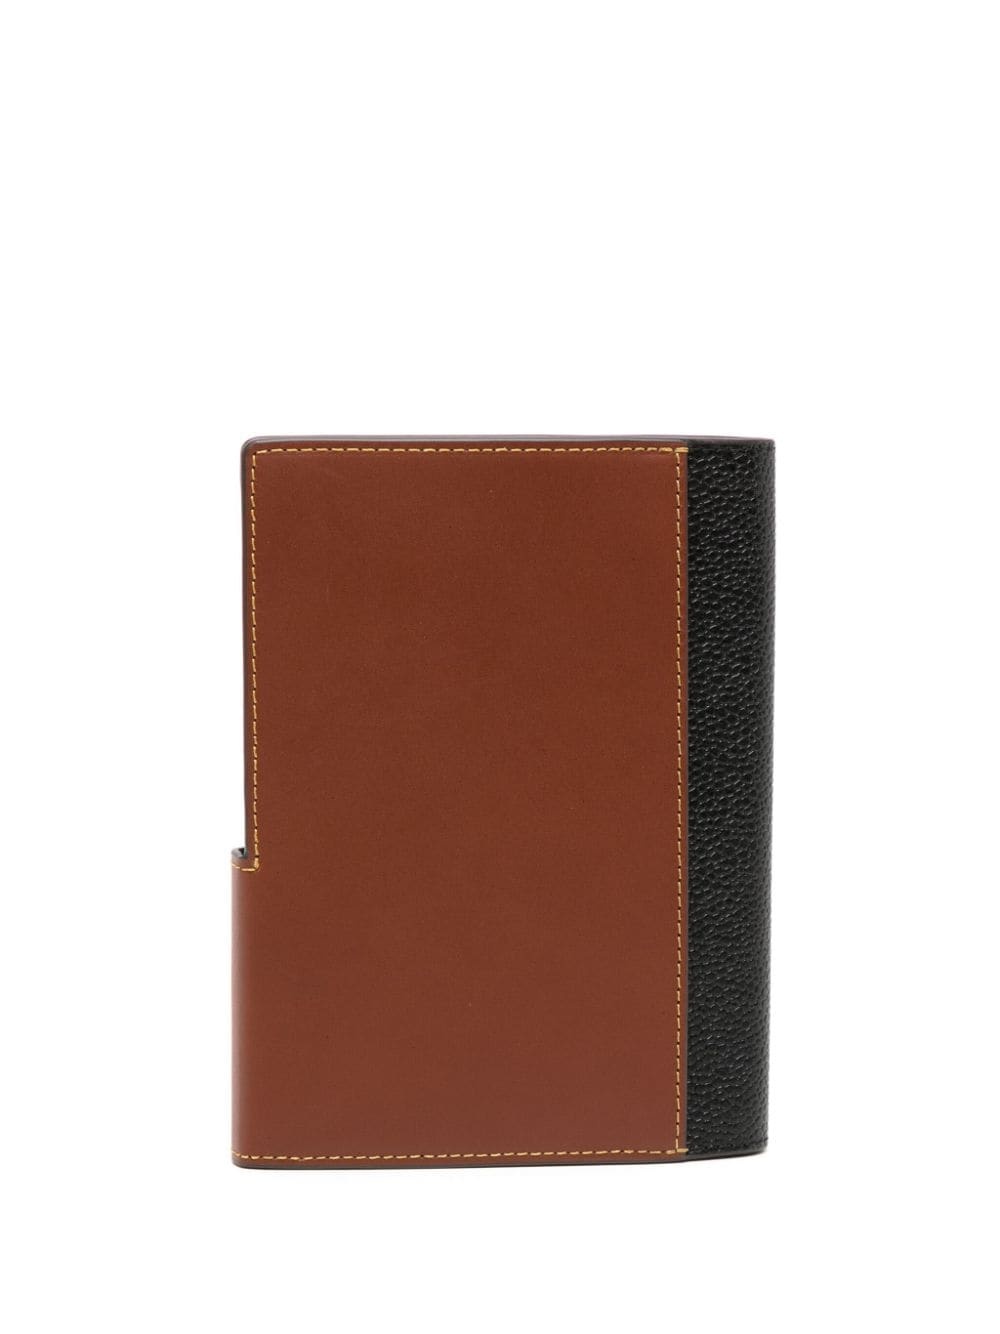 Heritage Travel leather wallet - 2